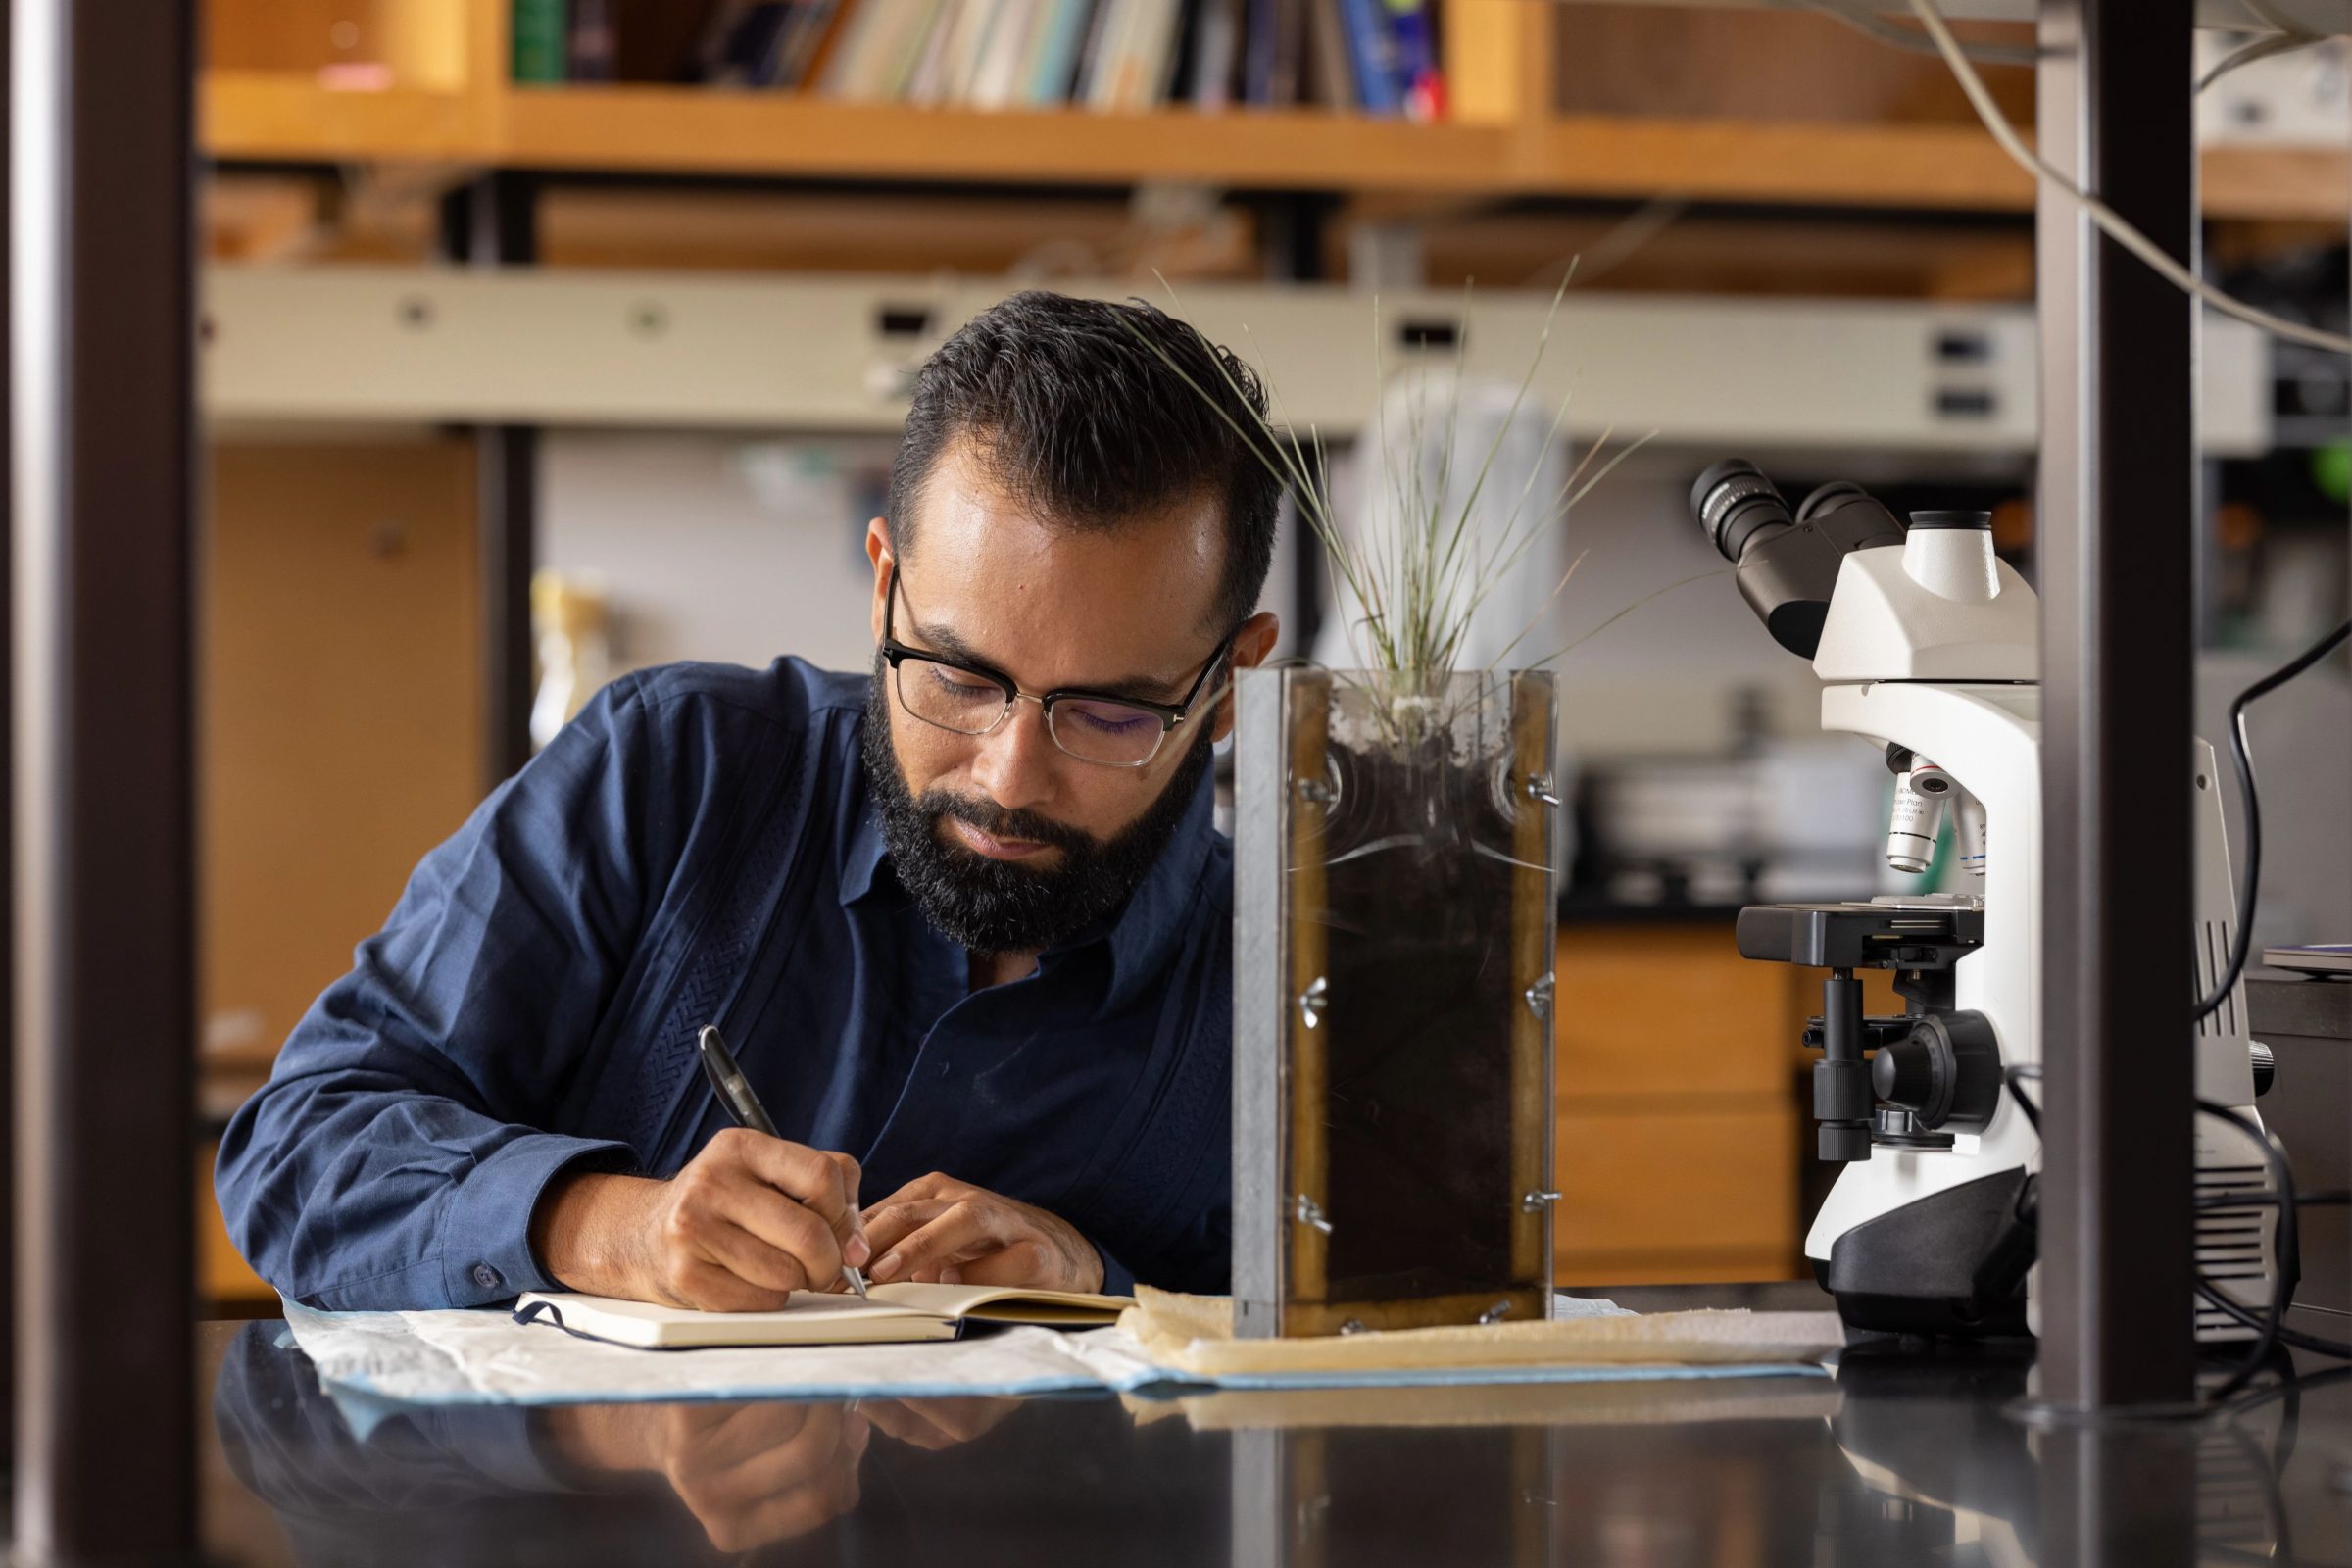 Center for Ecosystem Science and Society Associate Professor Javier Ceja-Navarro writing notes in his lab.